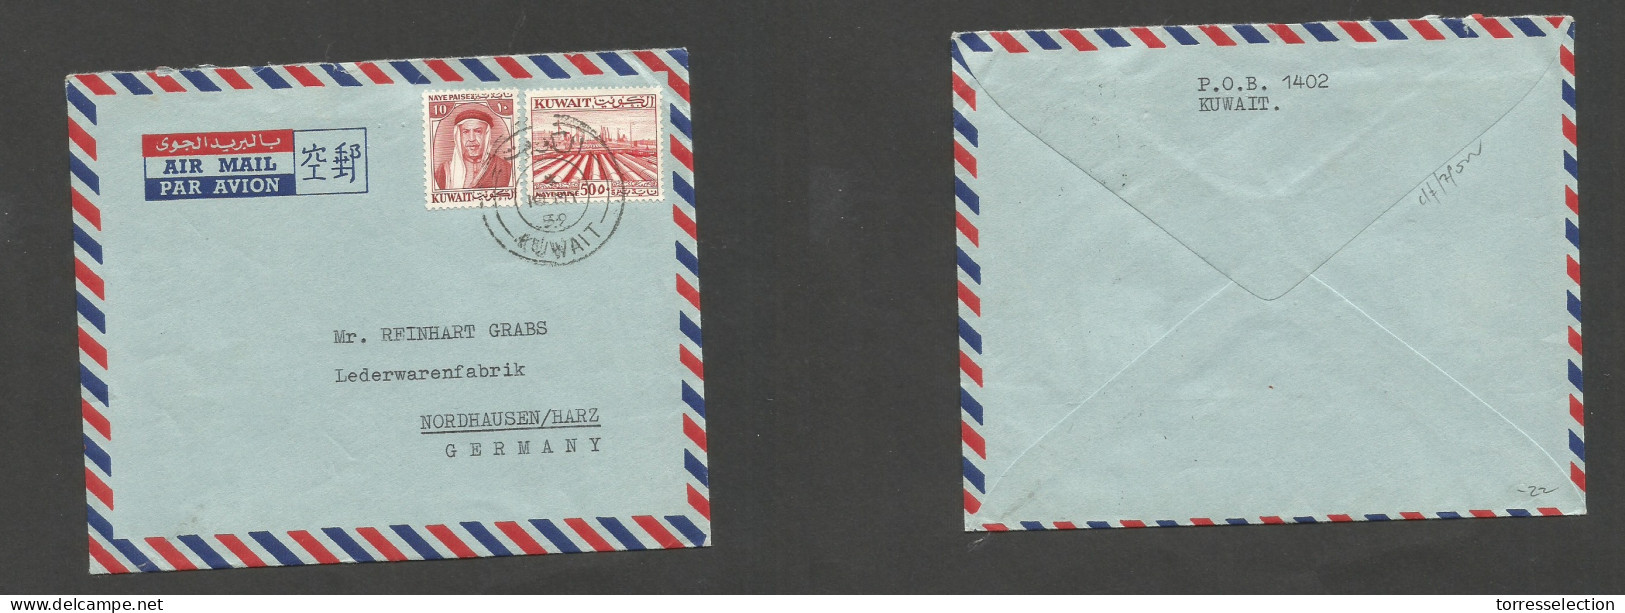 KUWAIT. 1959 (10 May) GPO - Germany, Nordhausen, Harz. Air Multifkd Envelope With Contains. Fine. - Kuwait